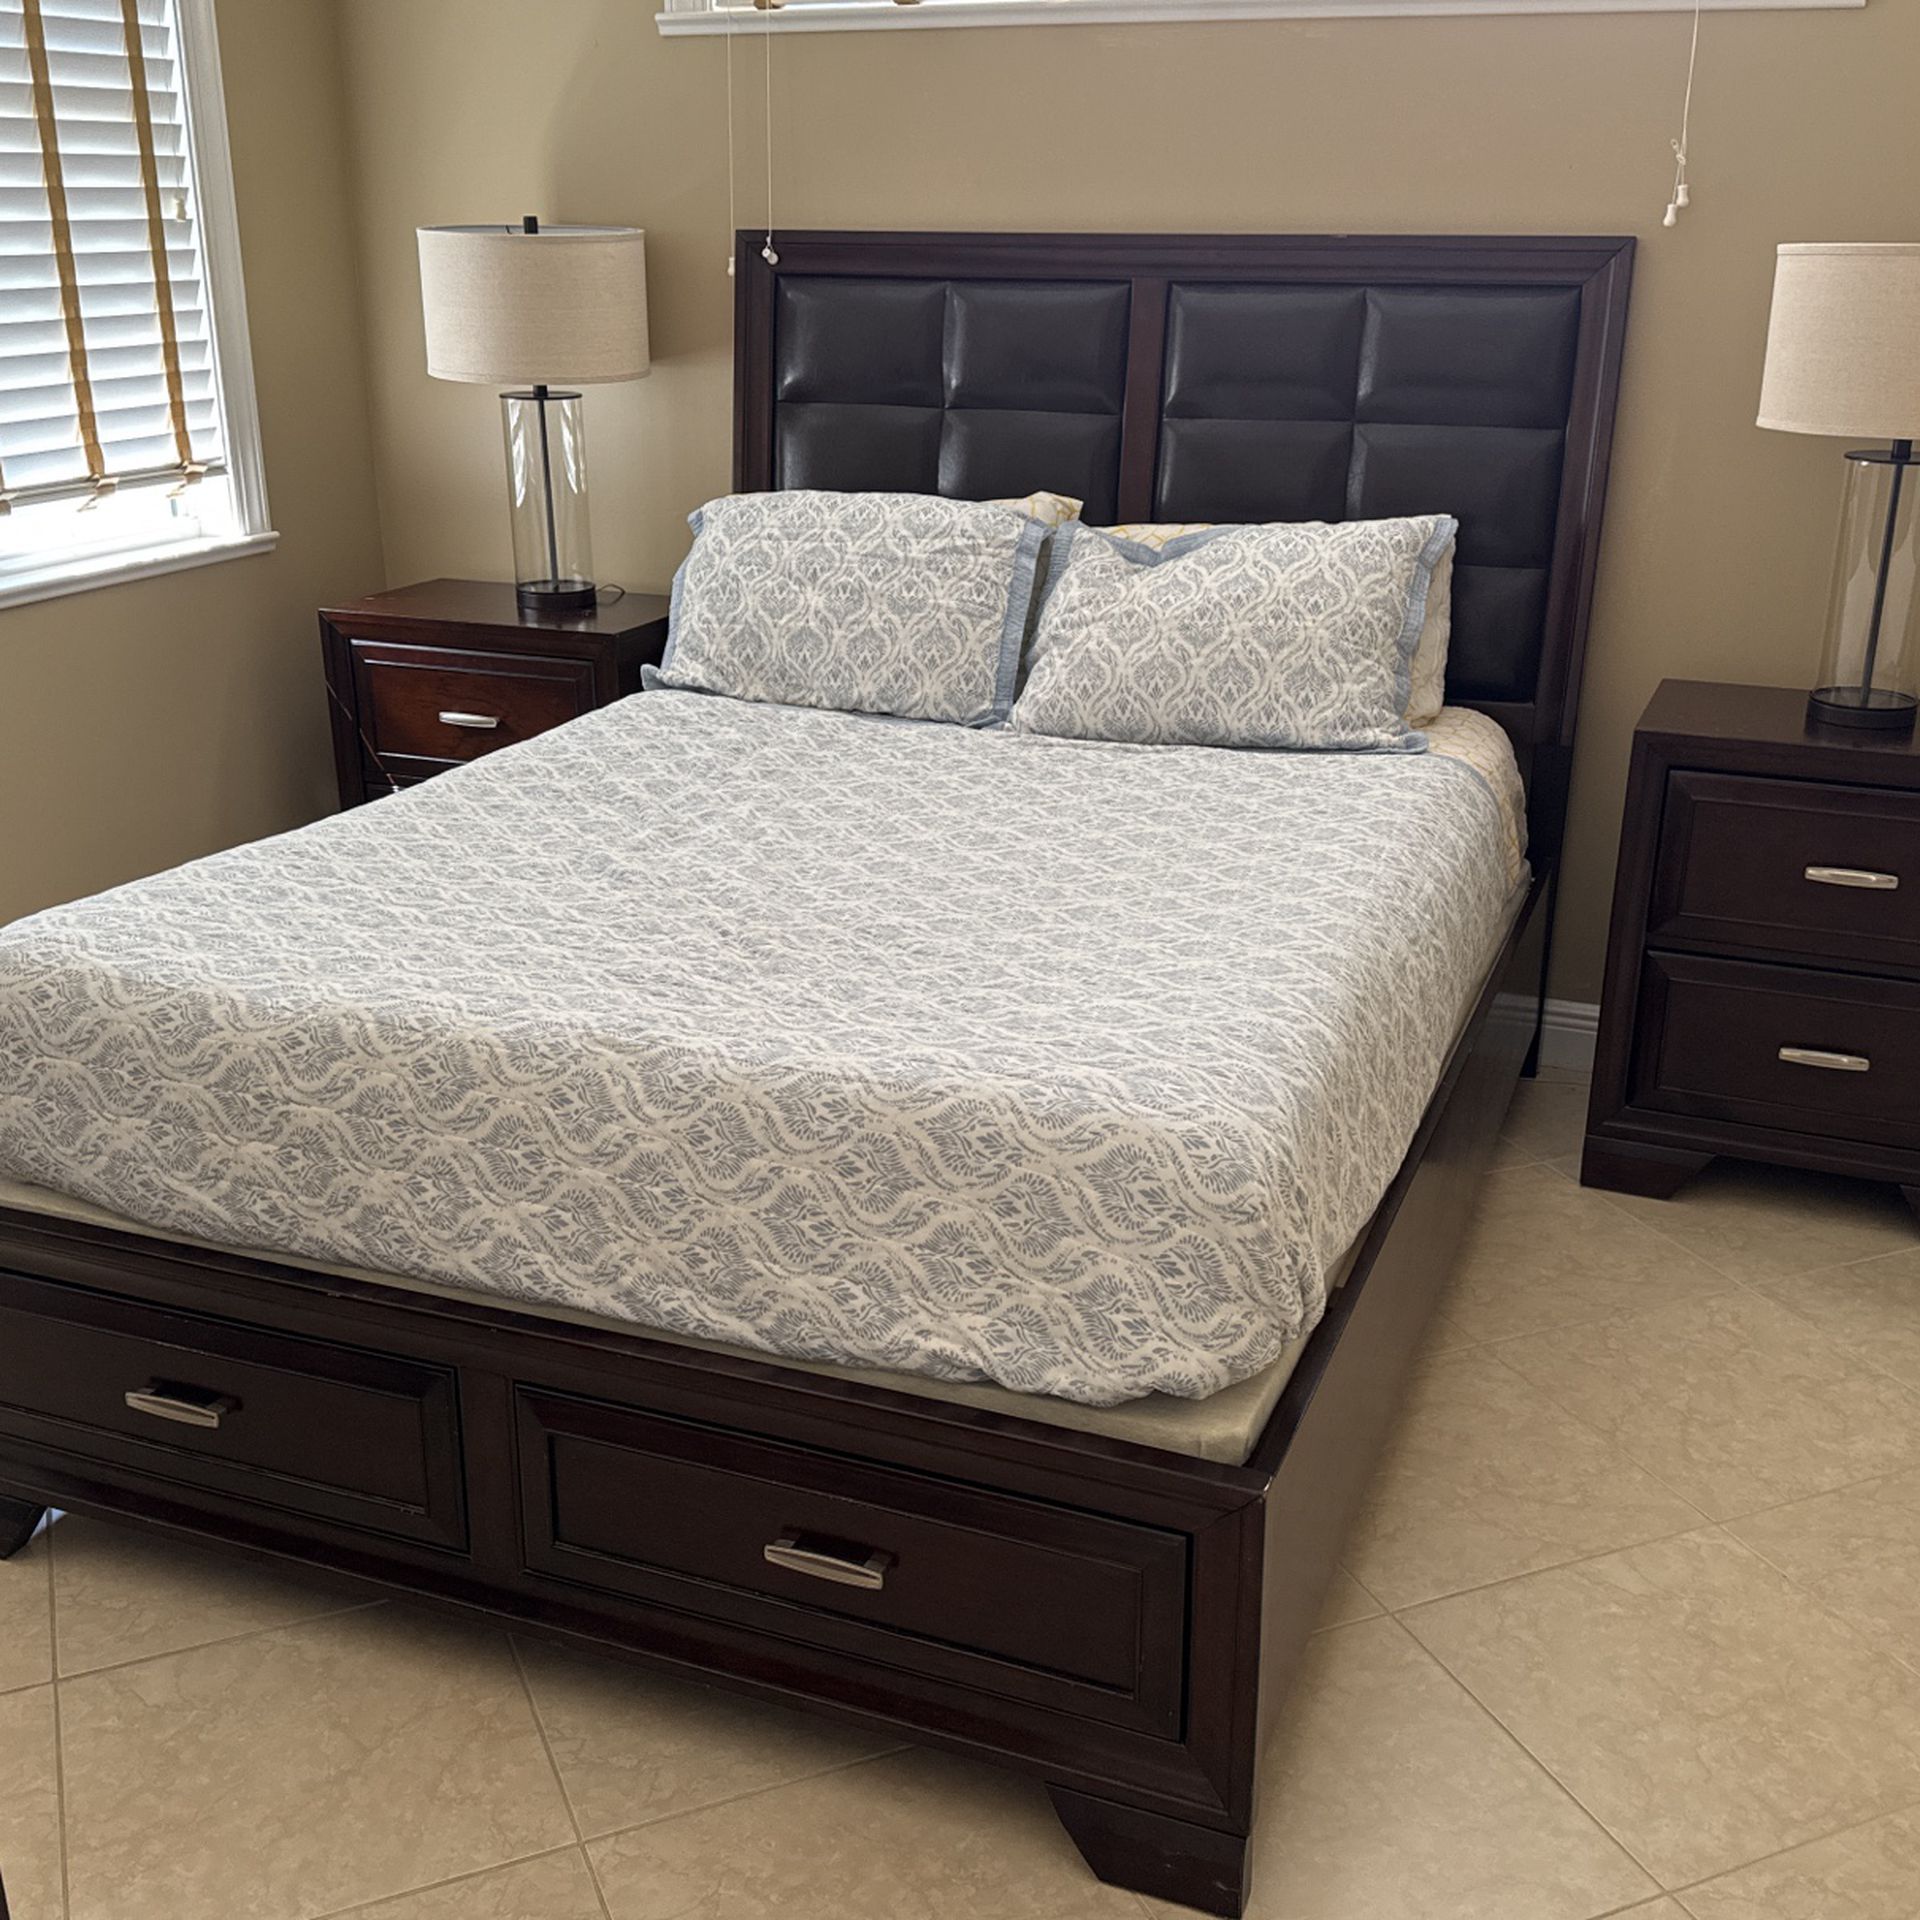 Five Piece Bedroom Set - Queen Bed With Two Nightstands And Dresser With Framed Mirror